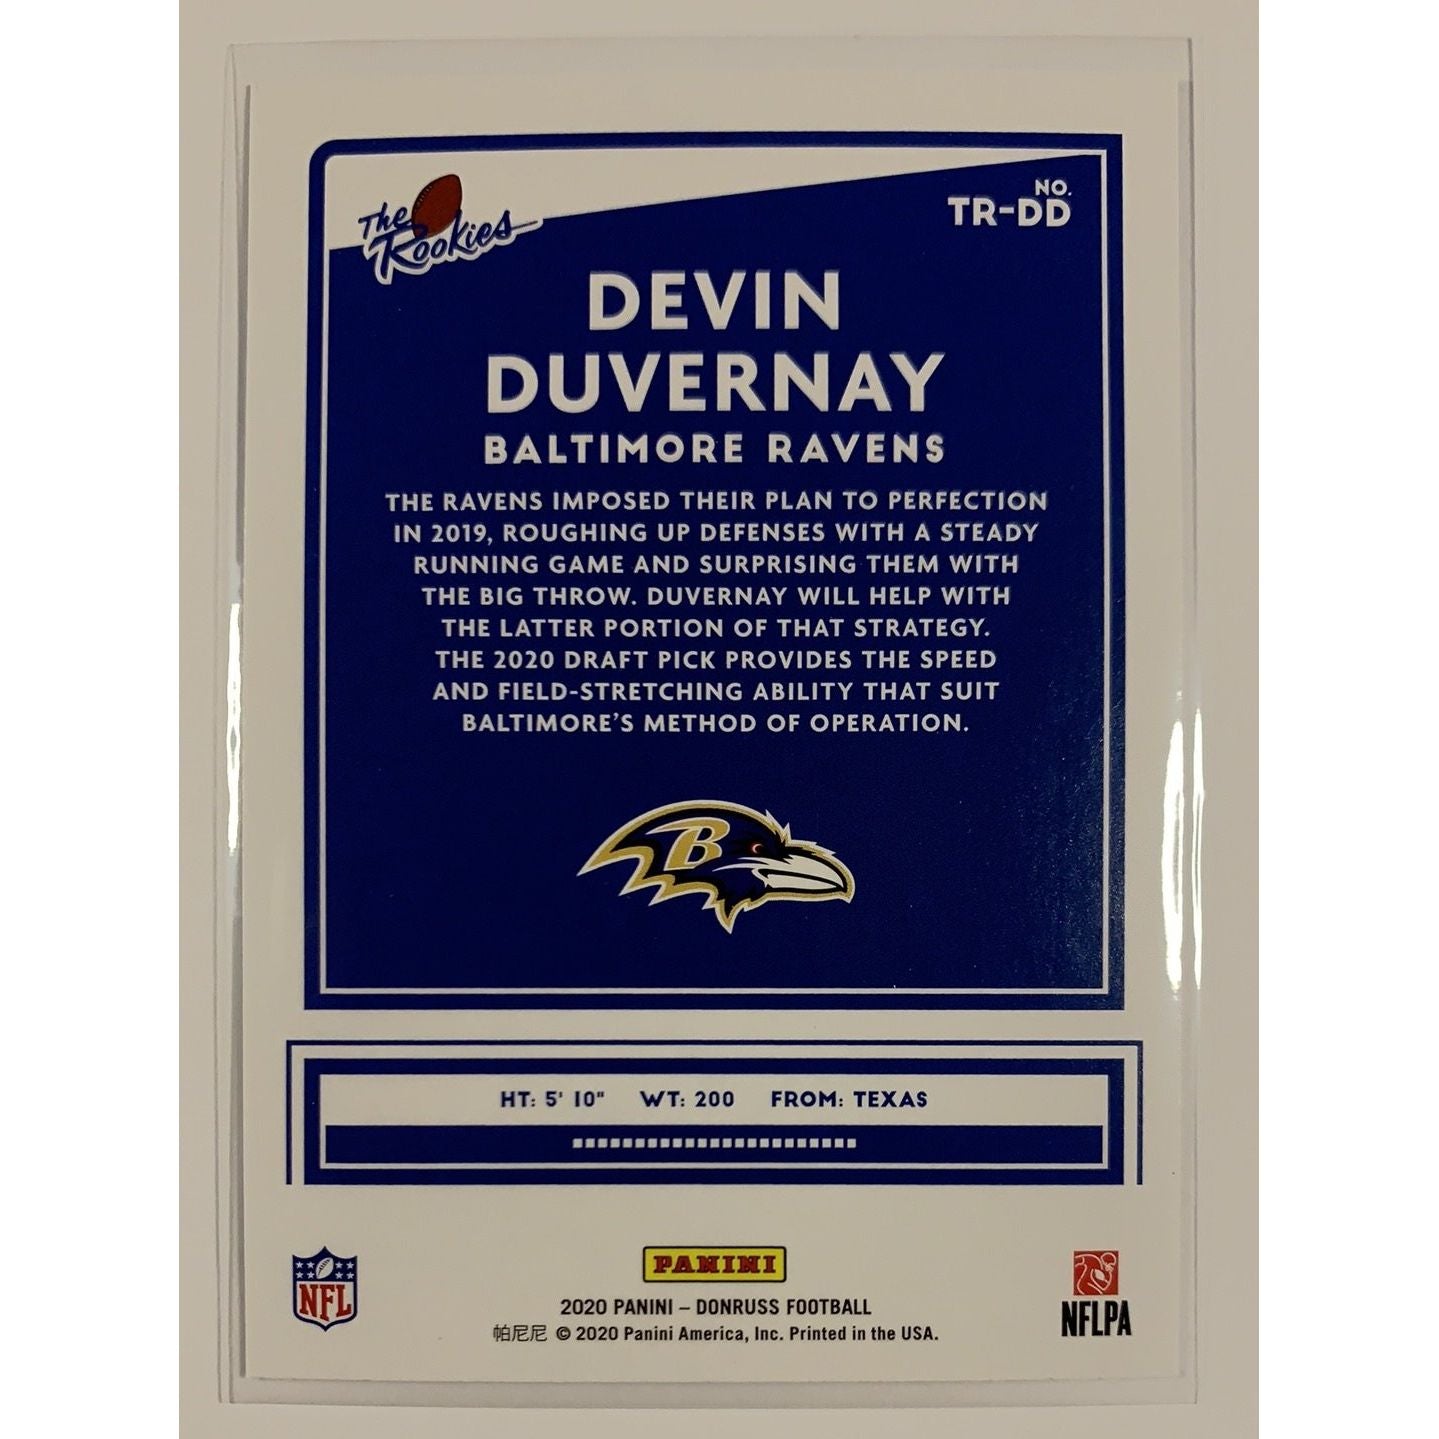  2020 Donruss Devin Duvernay The Rookies Holo Foil  Local Legends Cards & Collectibles